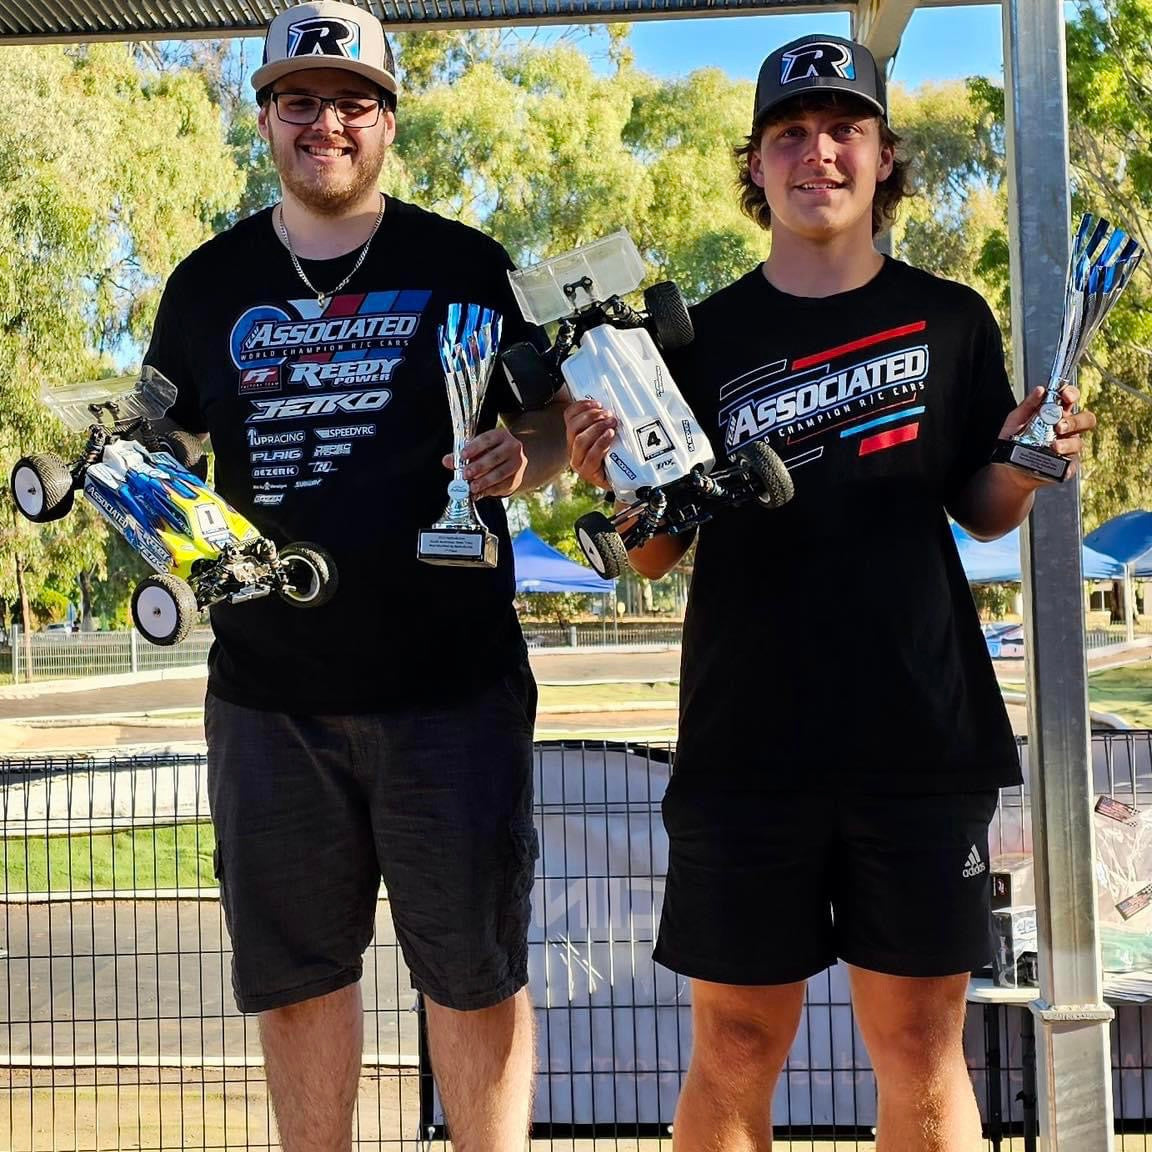 CS13 does it again with the TQ and win in Modified 4wd